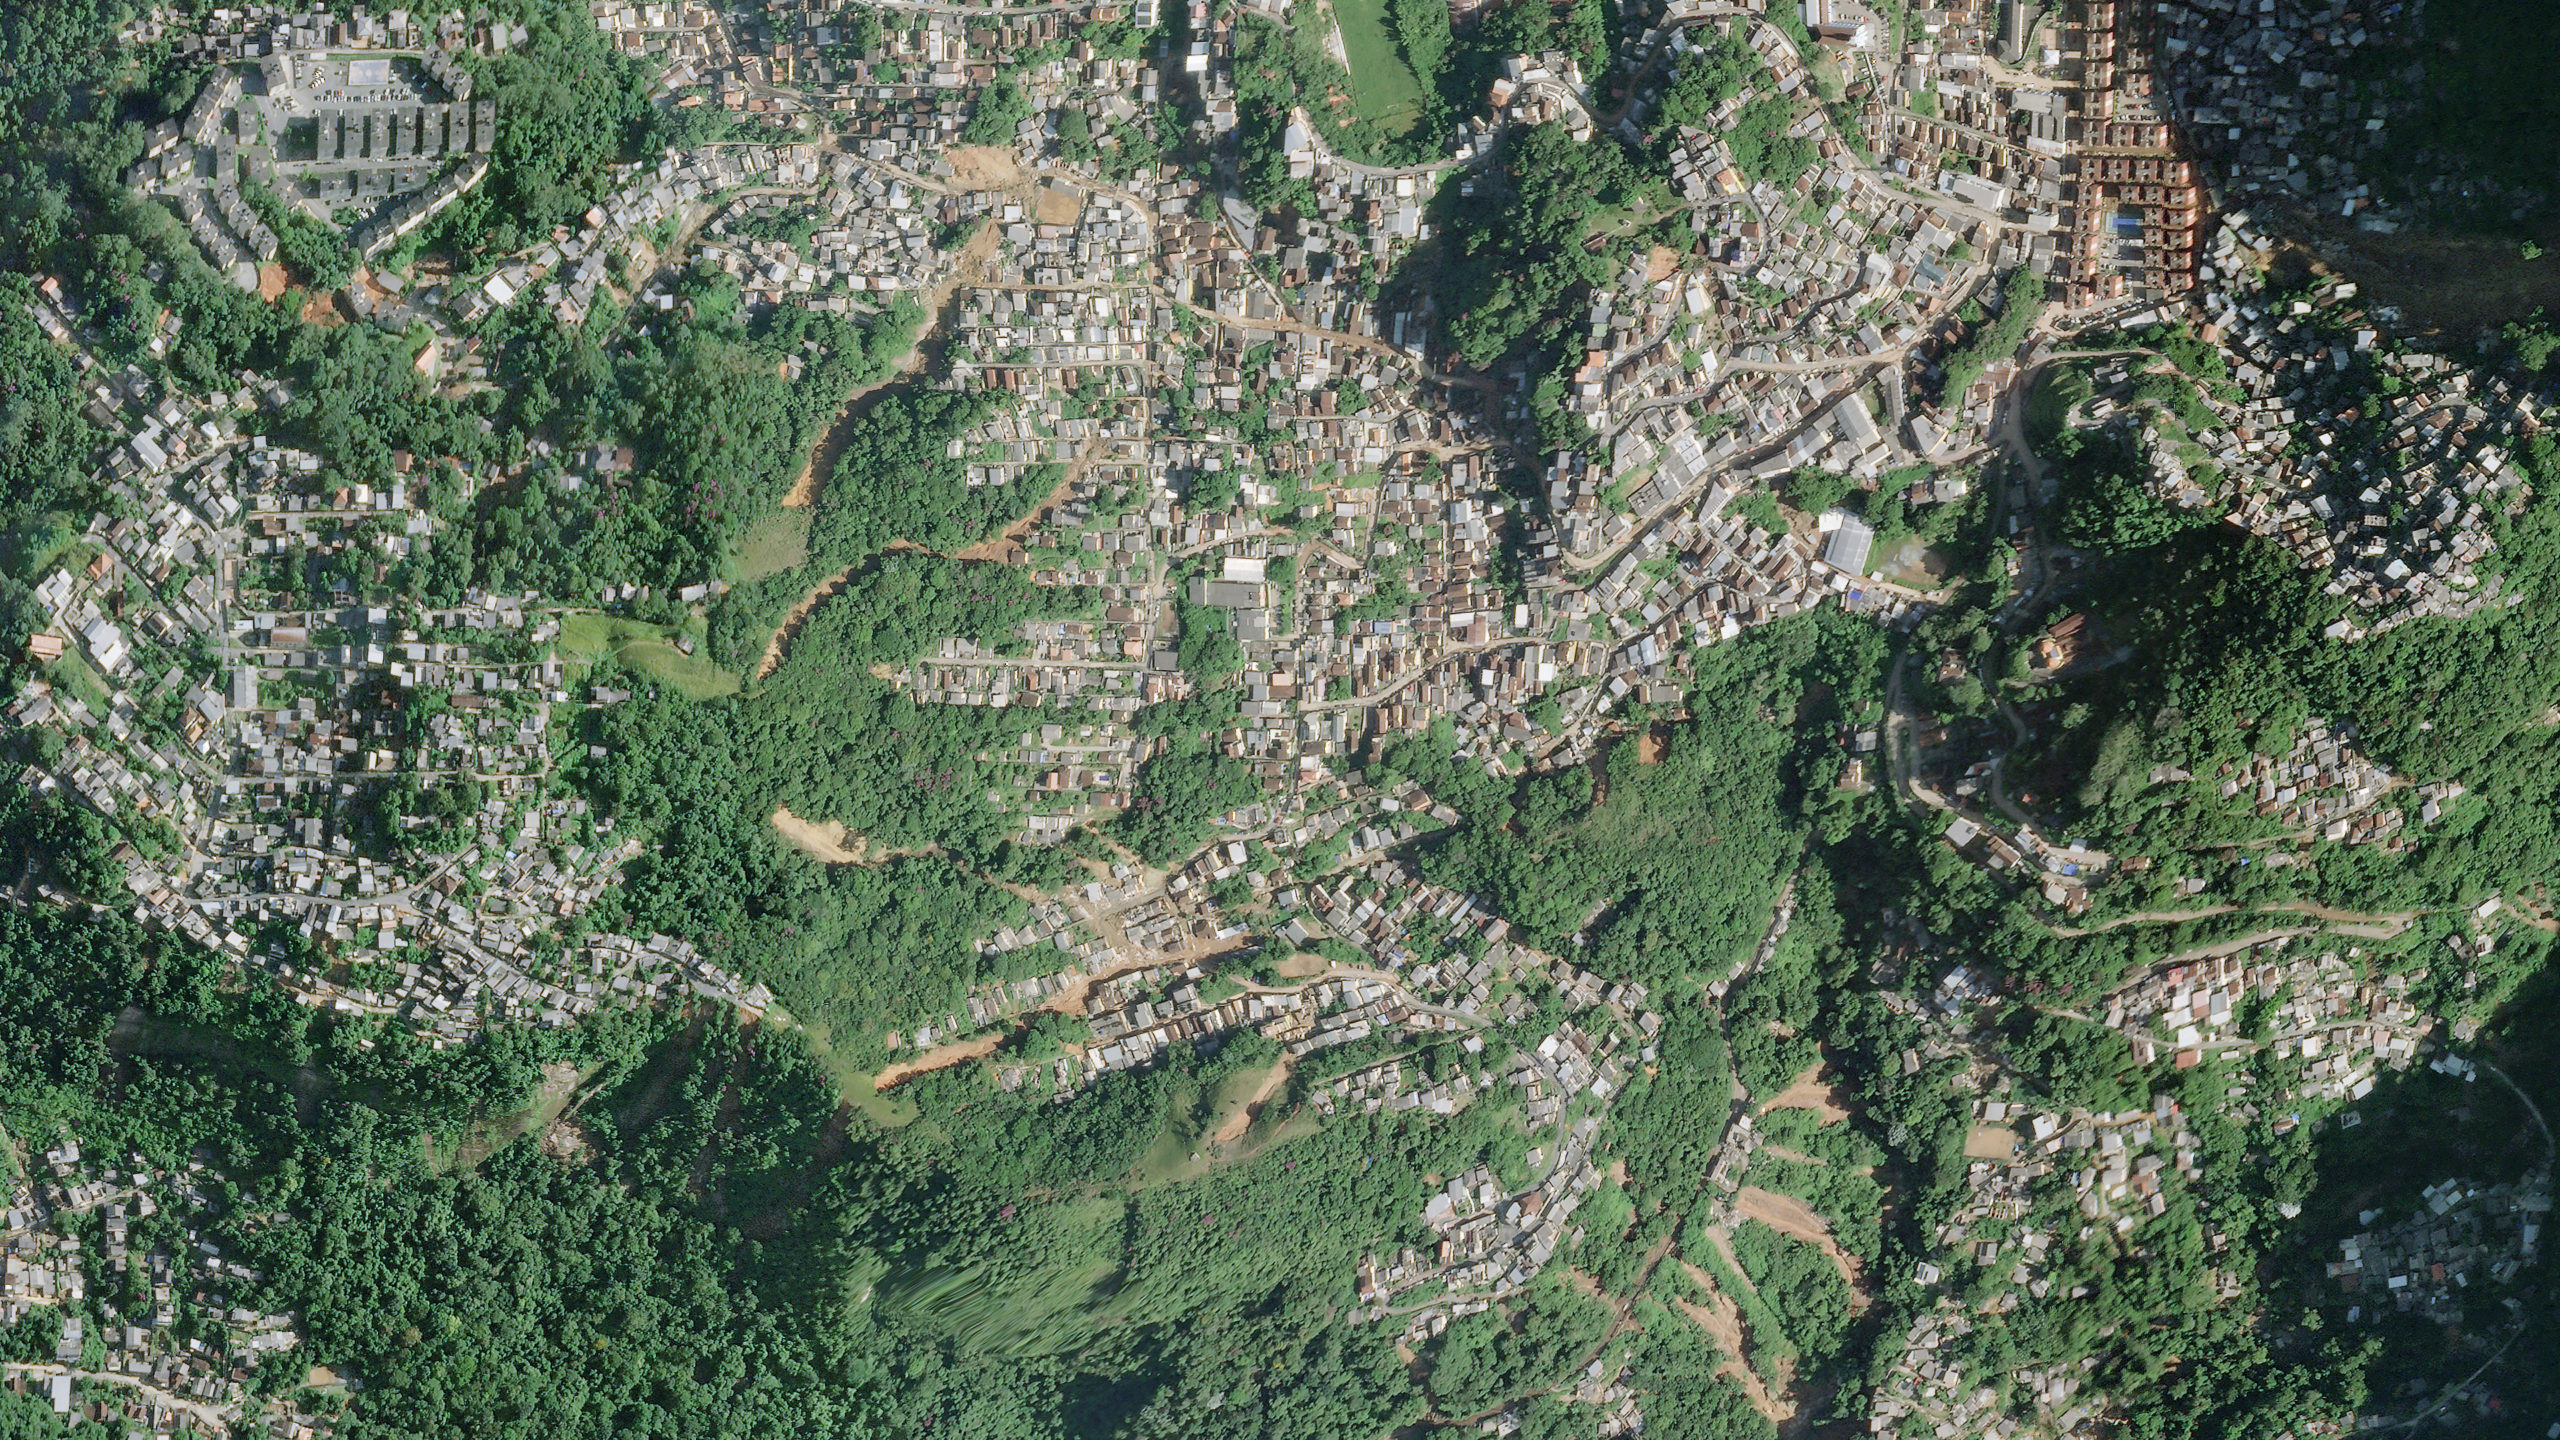 High resolution satellite image of the landslides in the south of the city of Petrópolis in Brazil. 